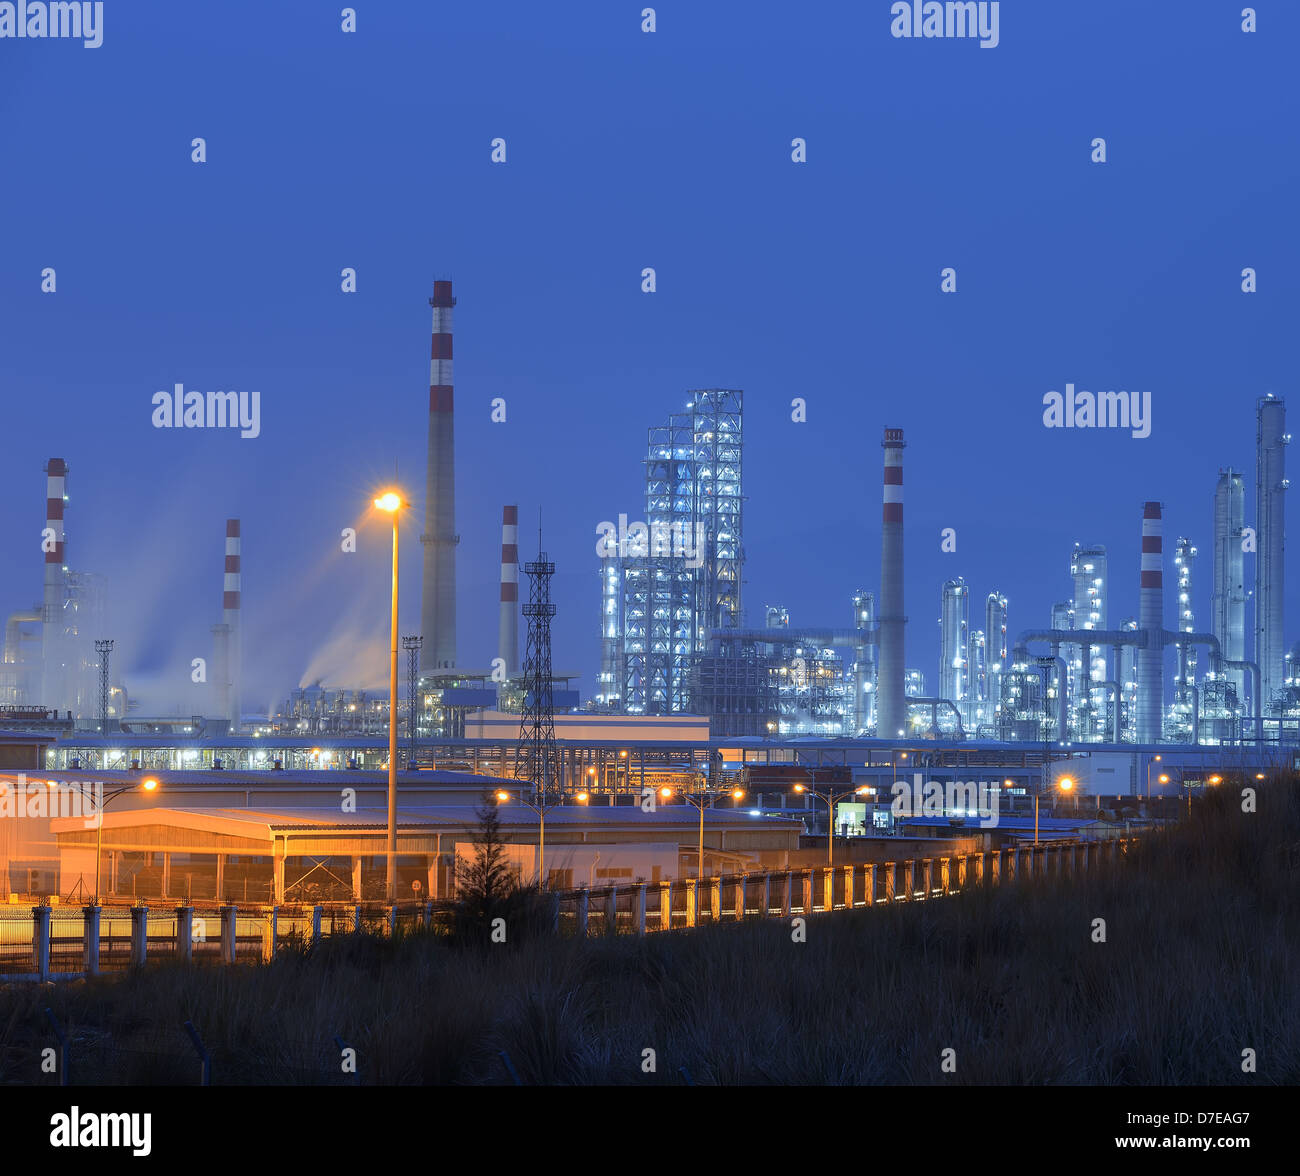 Oil refinery industrial plant Stock Photo